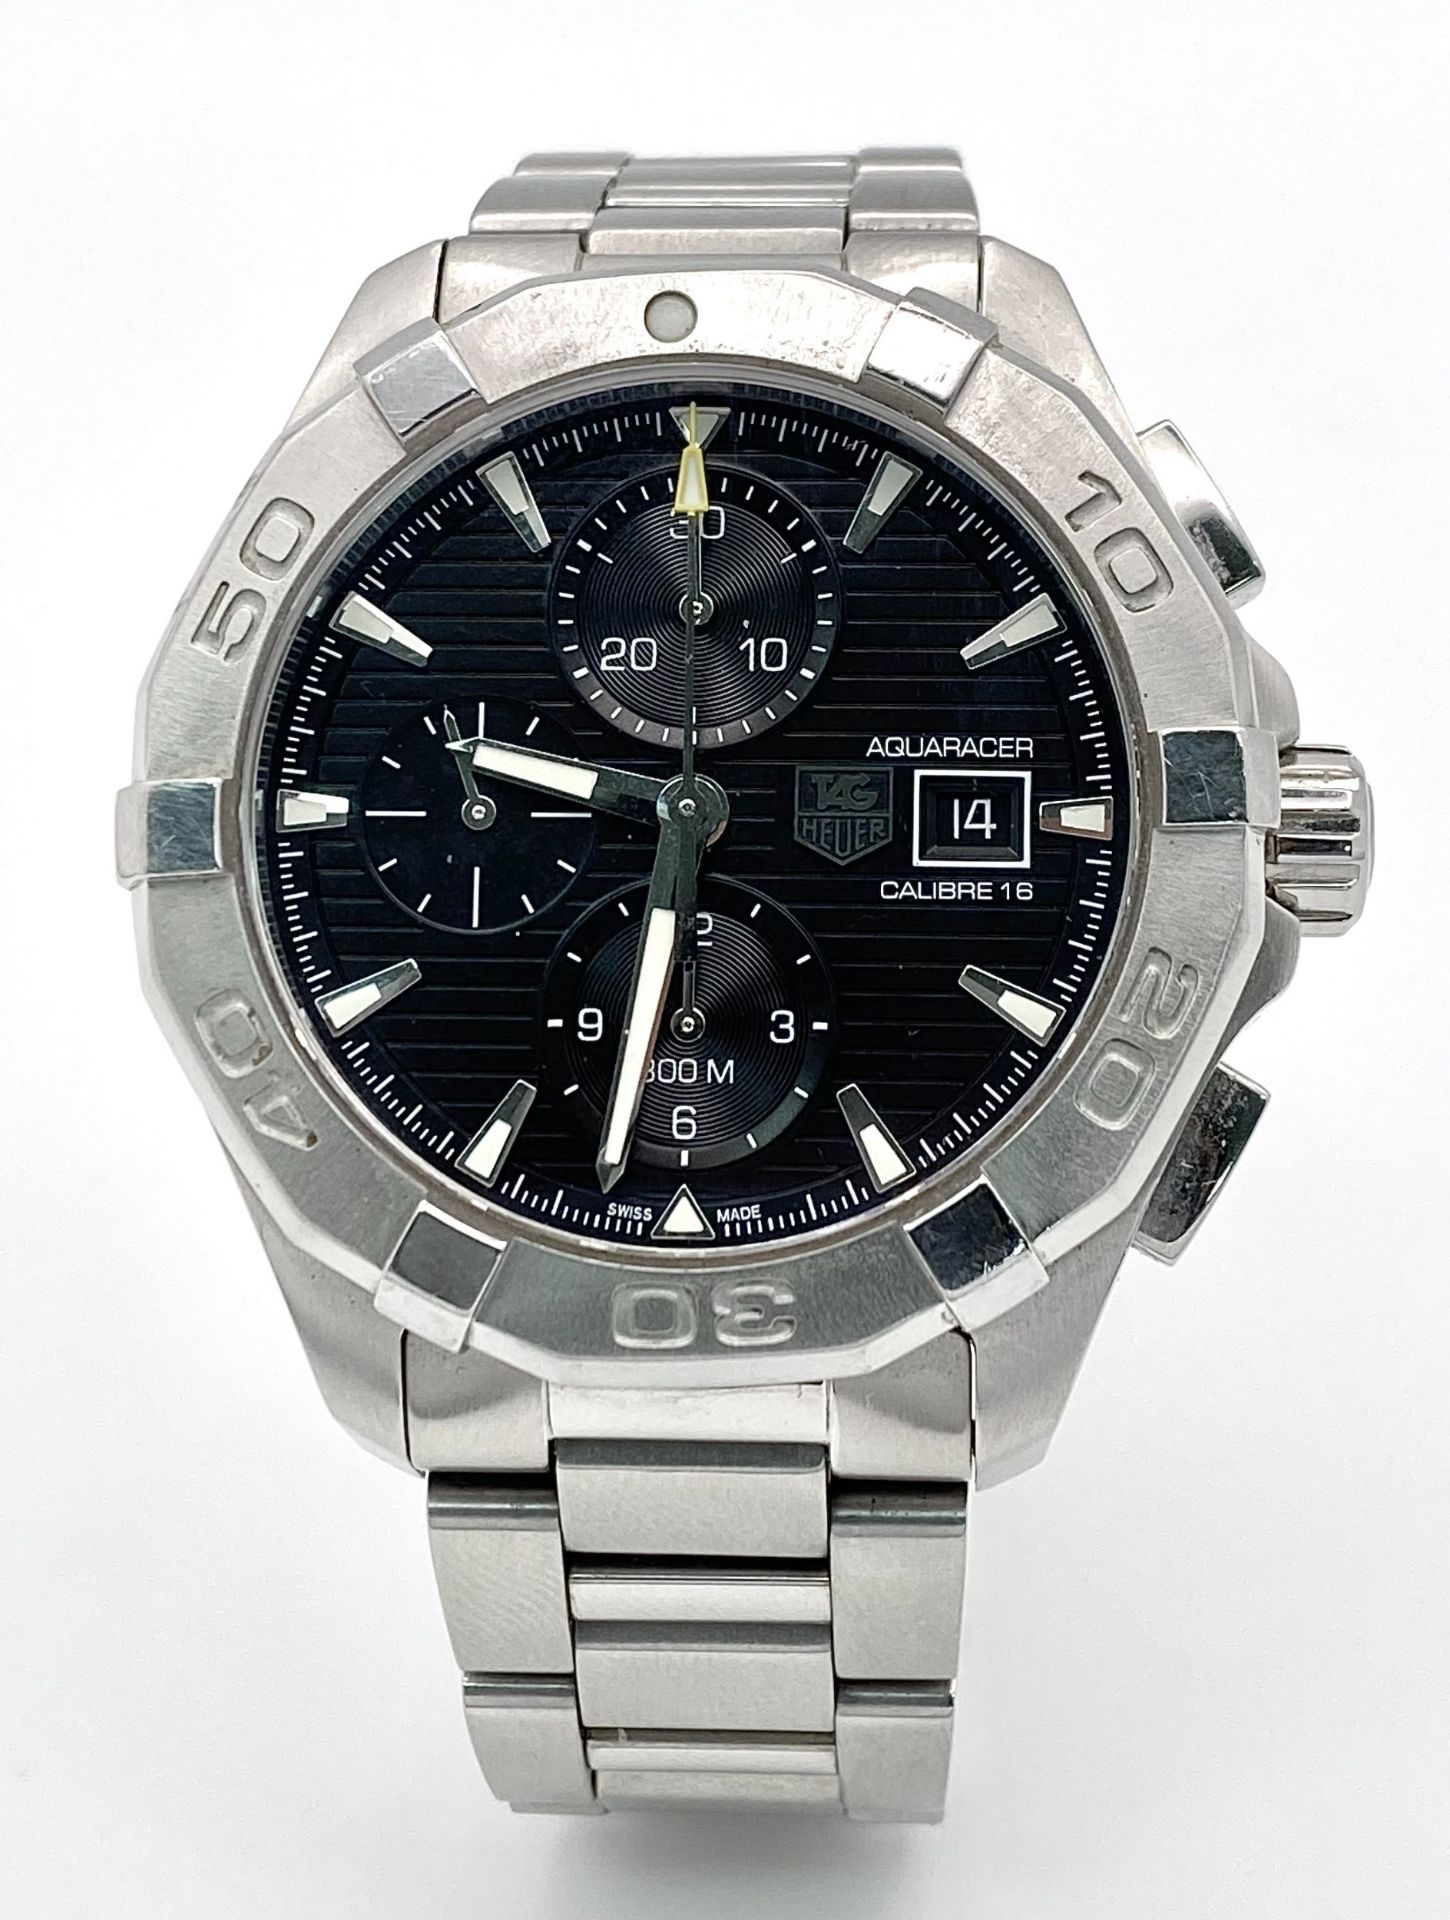 A TAG HEUER AQUARACER CALIBRE 16 AUTOMATIC GENTS WATCH - STAINLESS STEEL BRACELET AND CASE - 44MM. - Image 2 of 9